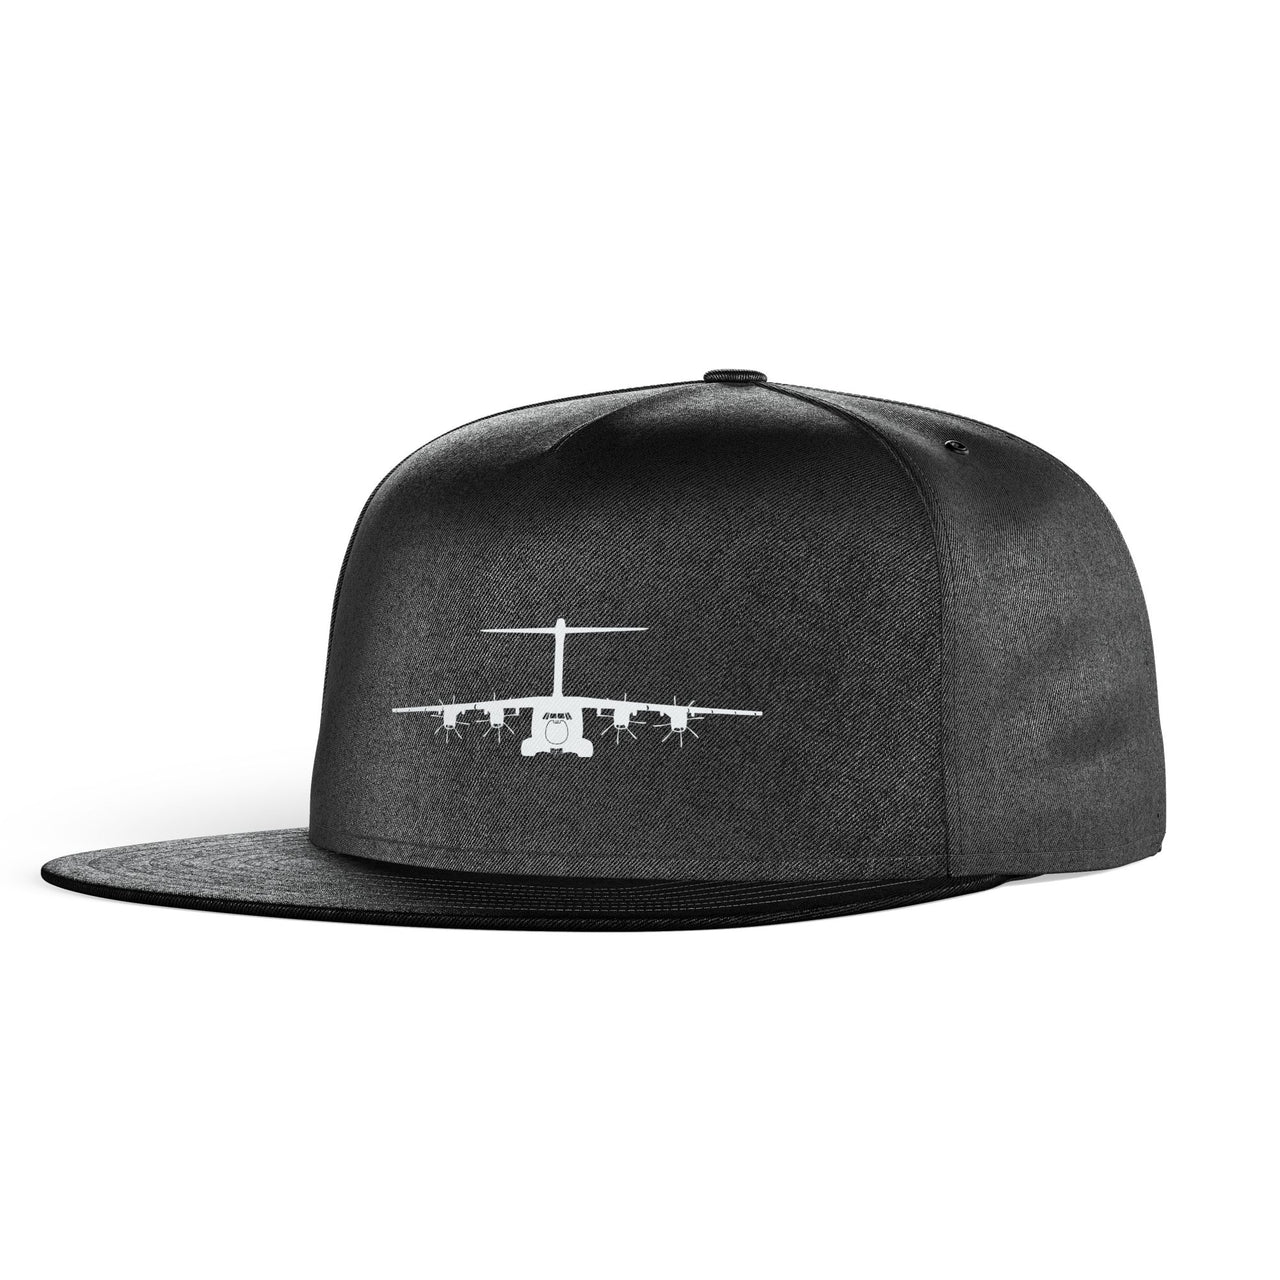 Airbus A400M Silhouette Designed Snapback Caps & Hats